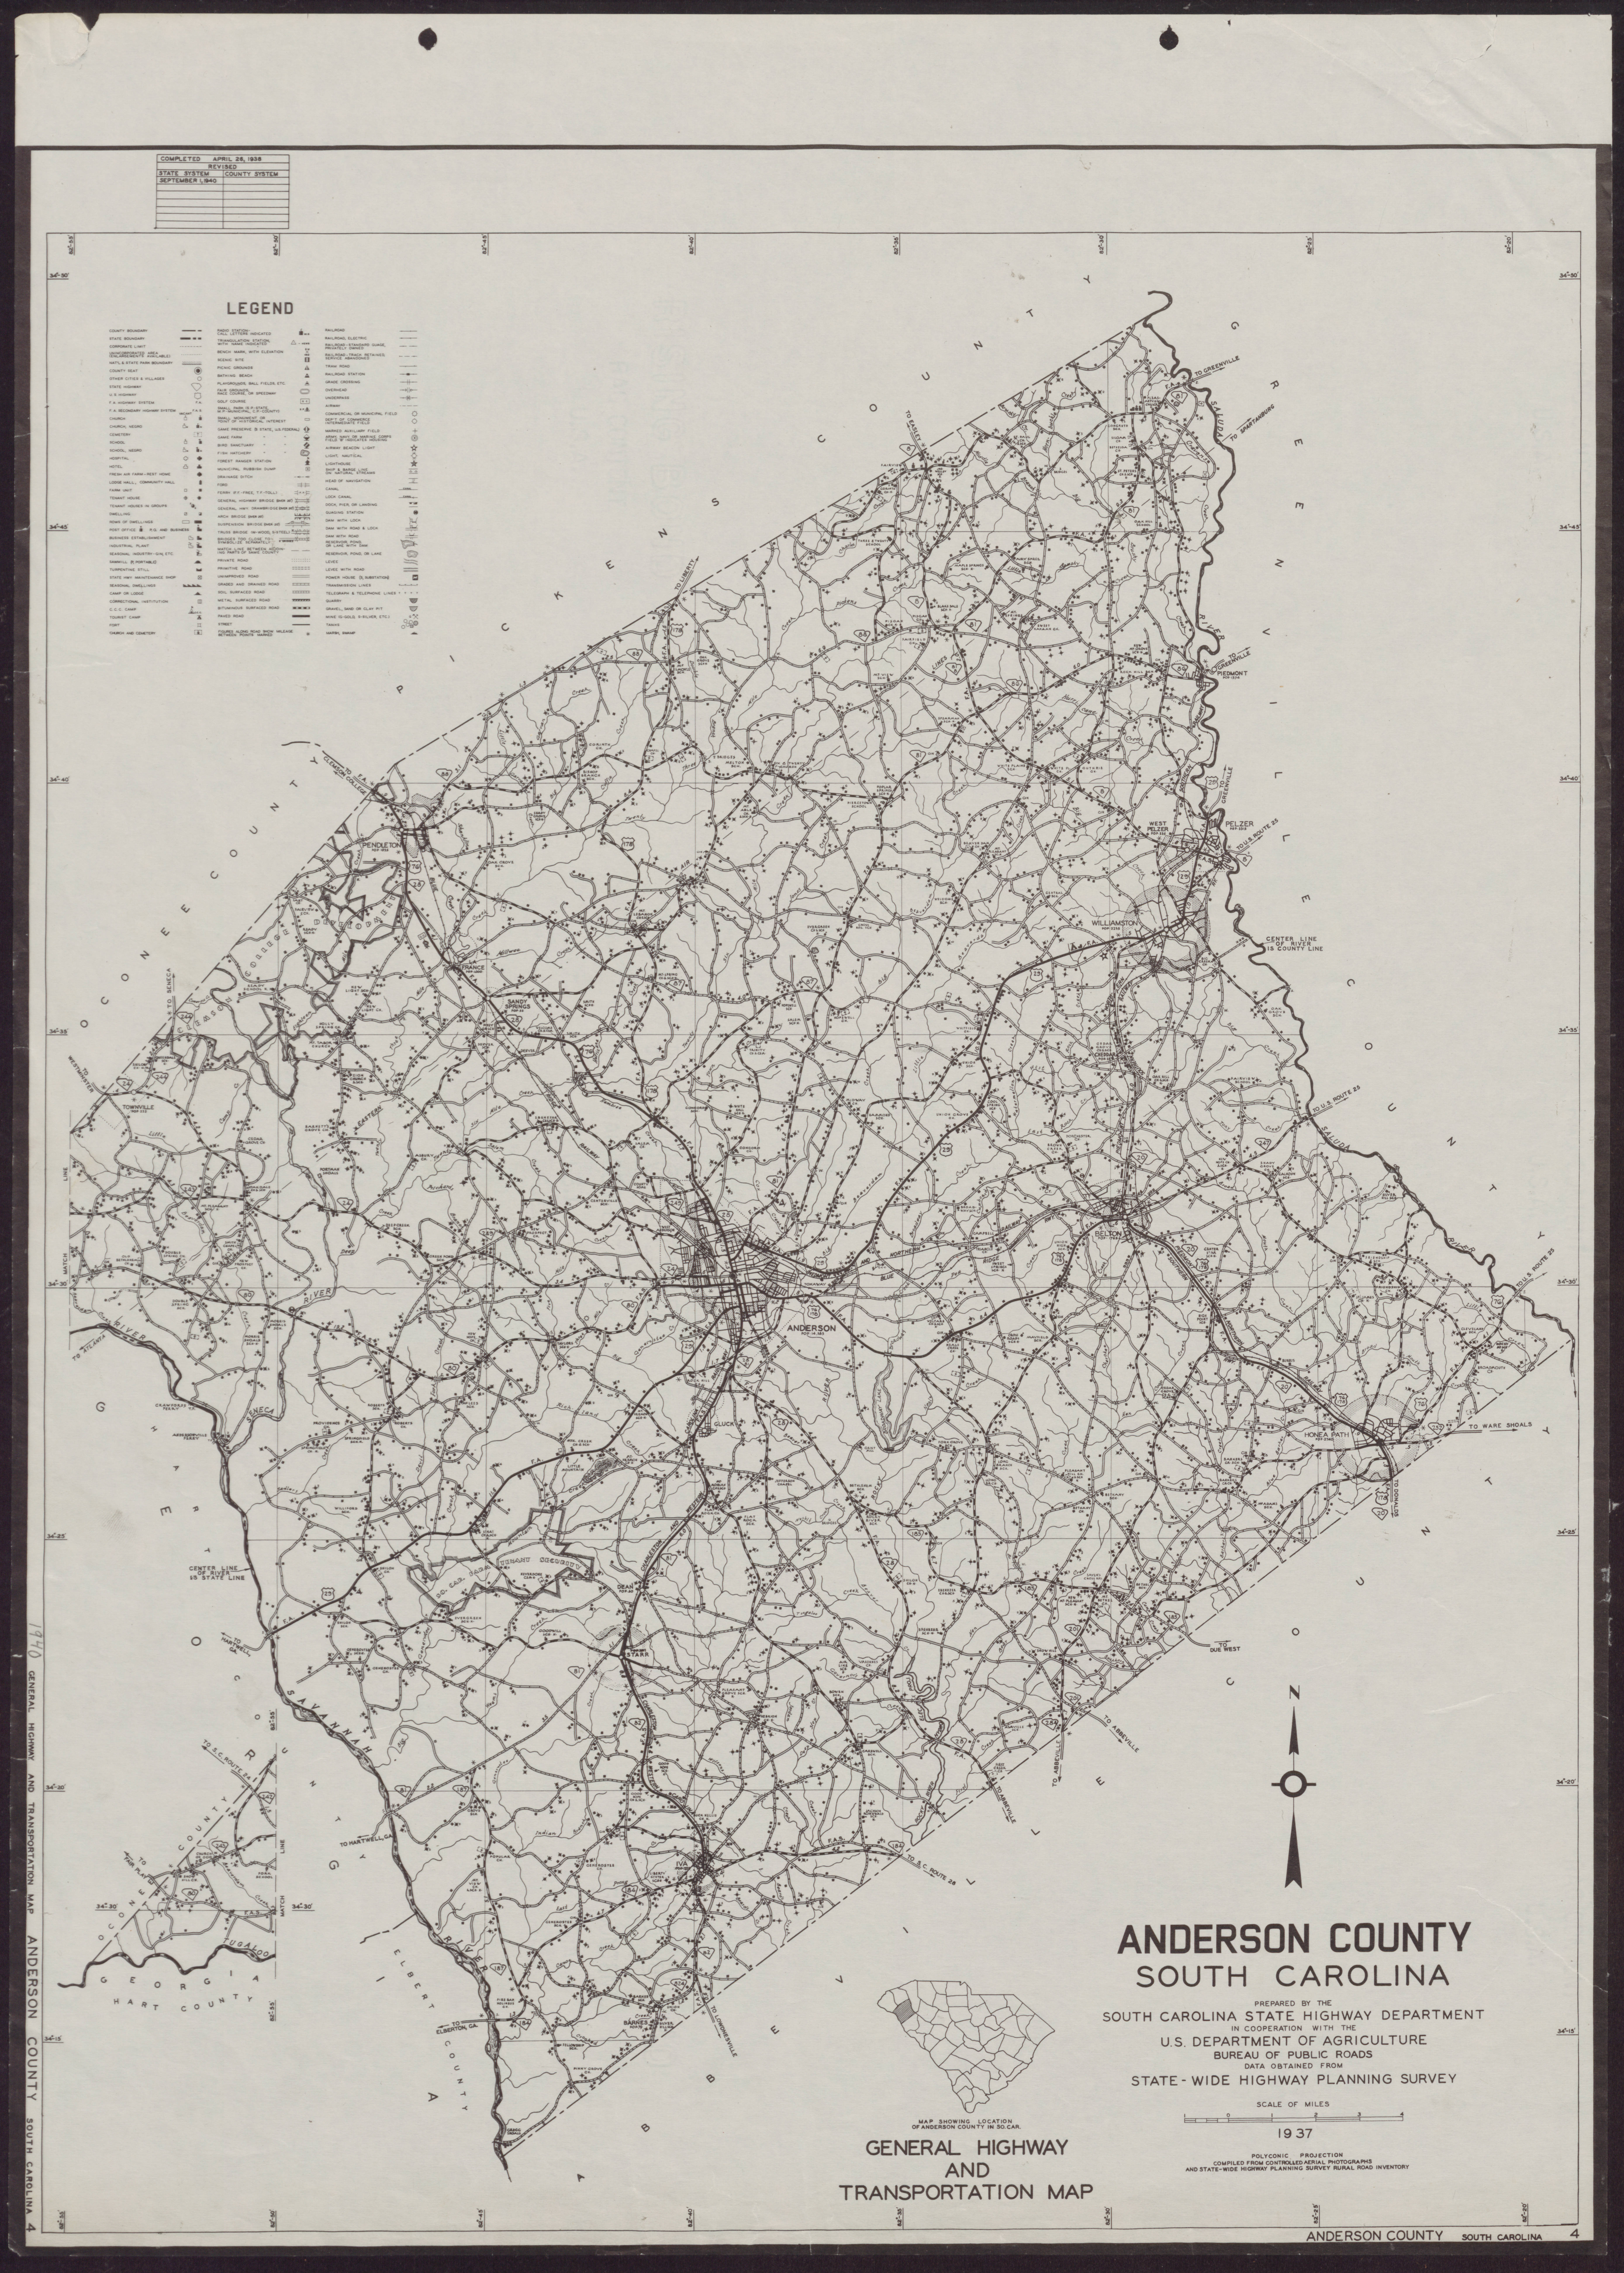 ENLARGEABLE MAP - 1937